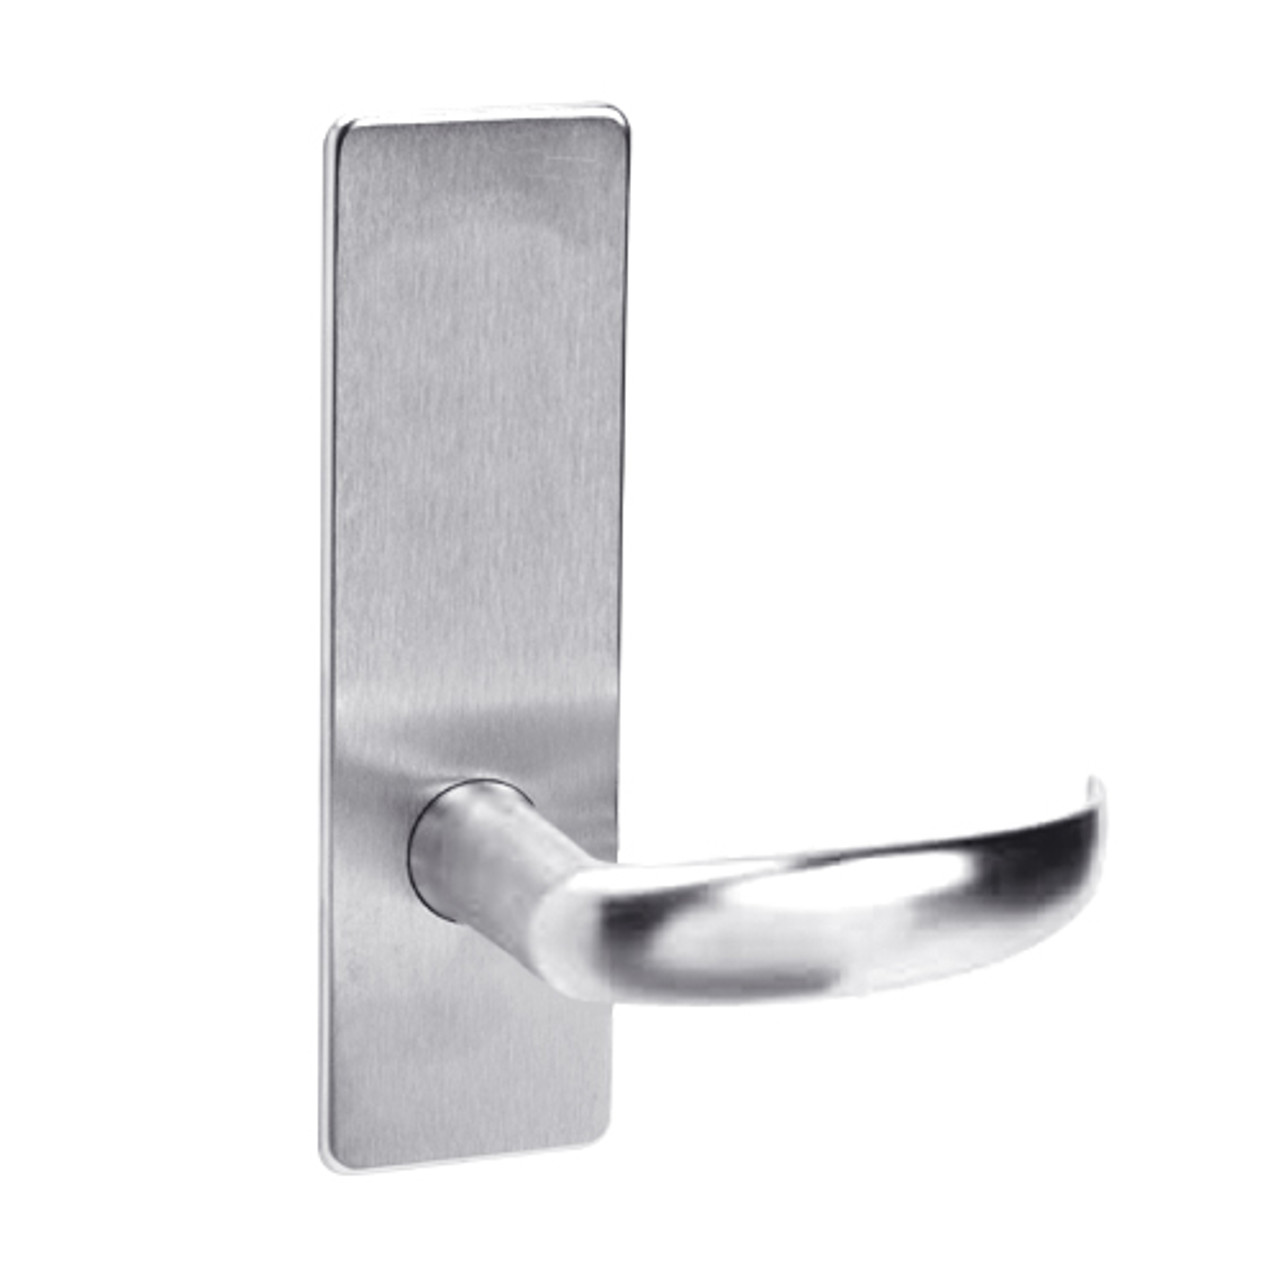 ML2060-PSN-629-M31 Corbin Russwin ML2000 Series Mortise Privacy Locksets with Princeton Lever in Bright Stainless Steel